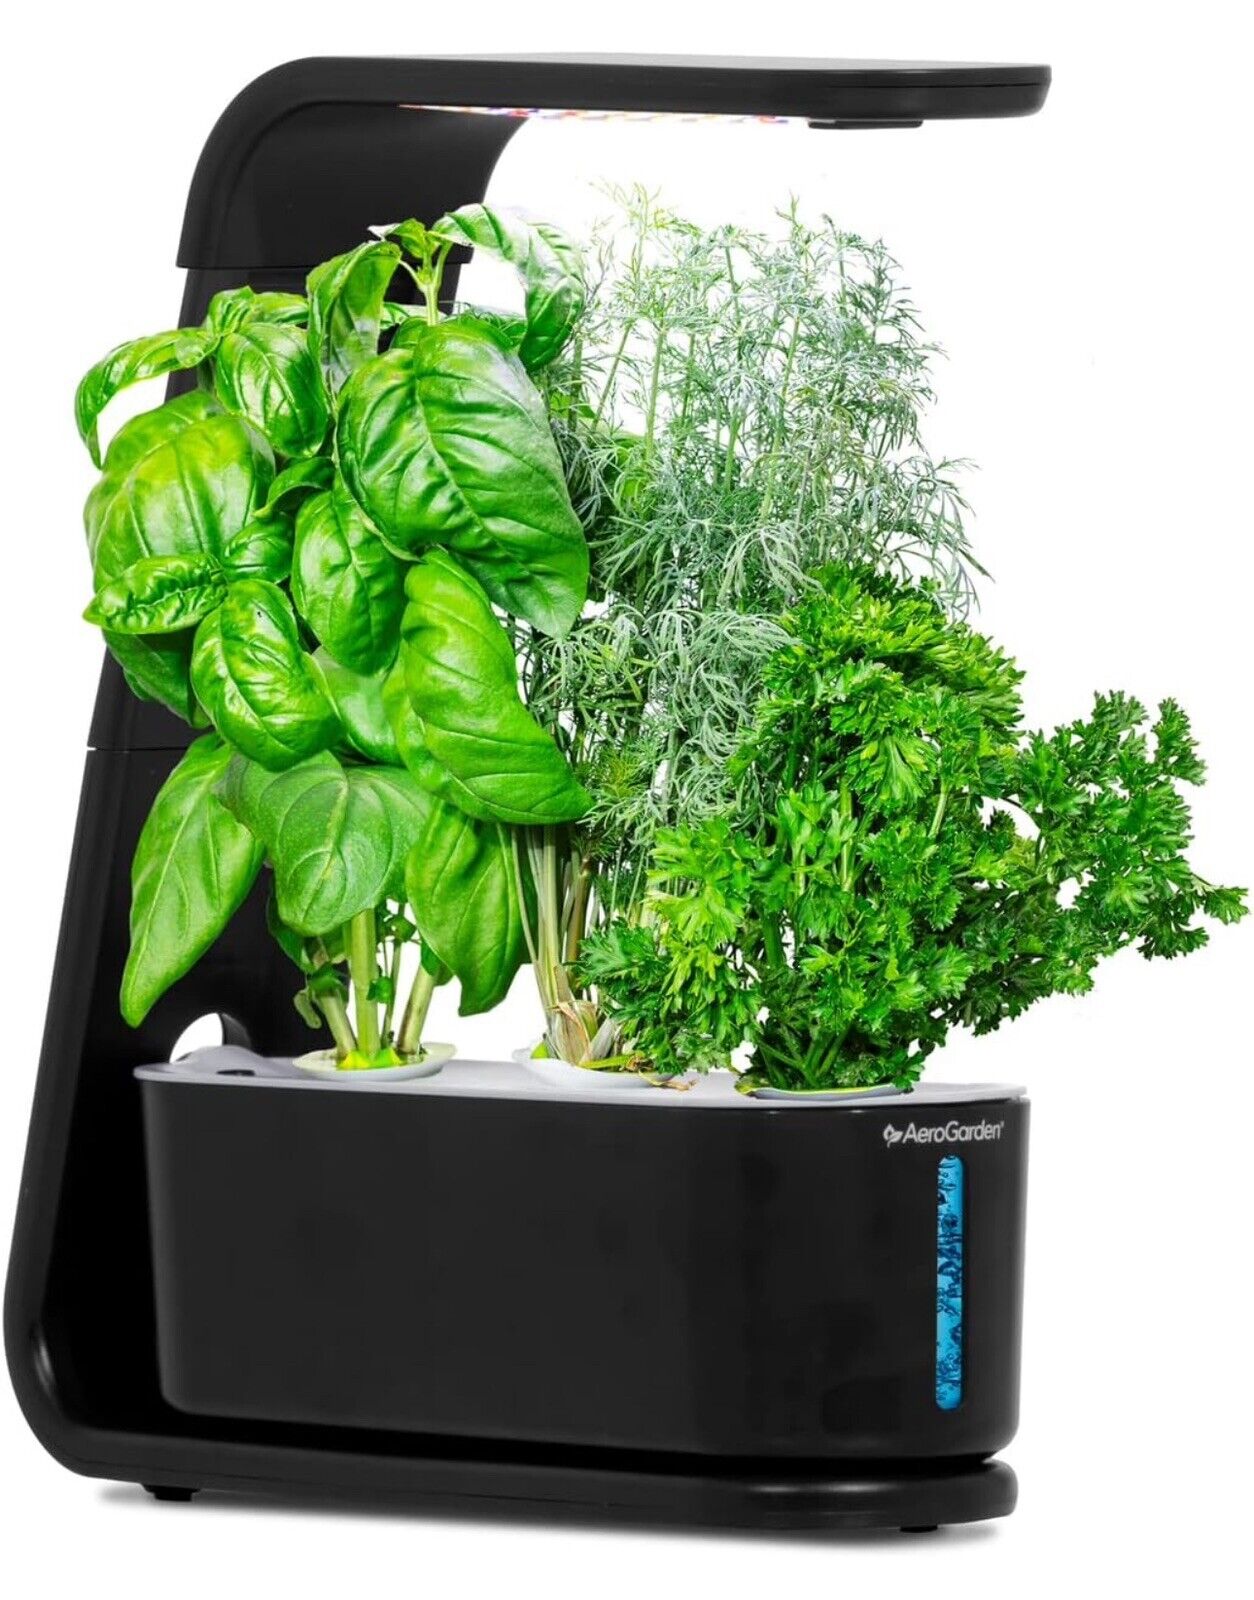 AeroGarden Indoor Home Garden Sprout Herb Seed Pods Kit LED Hydroponic Black NEW